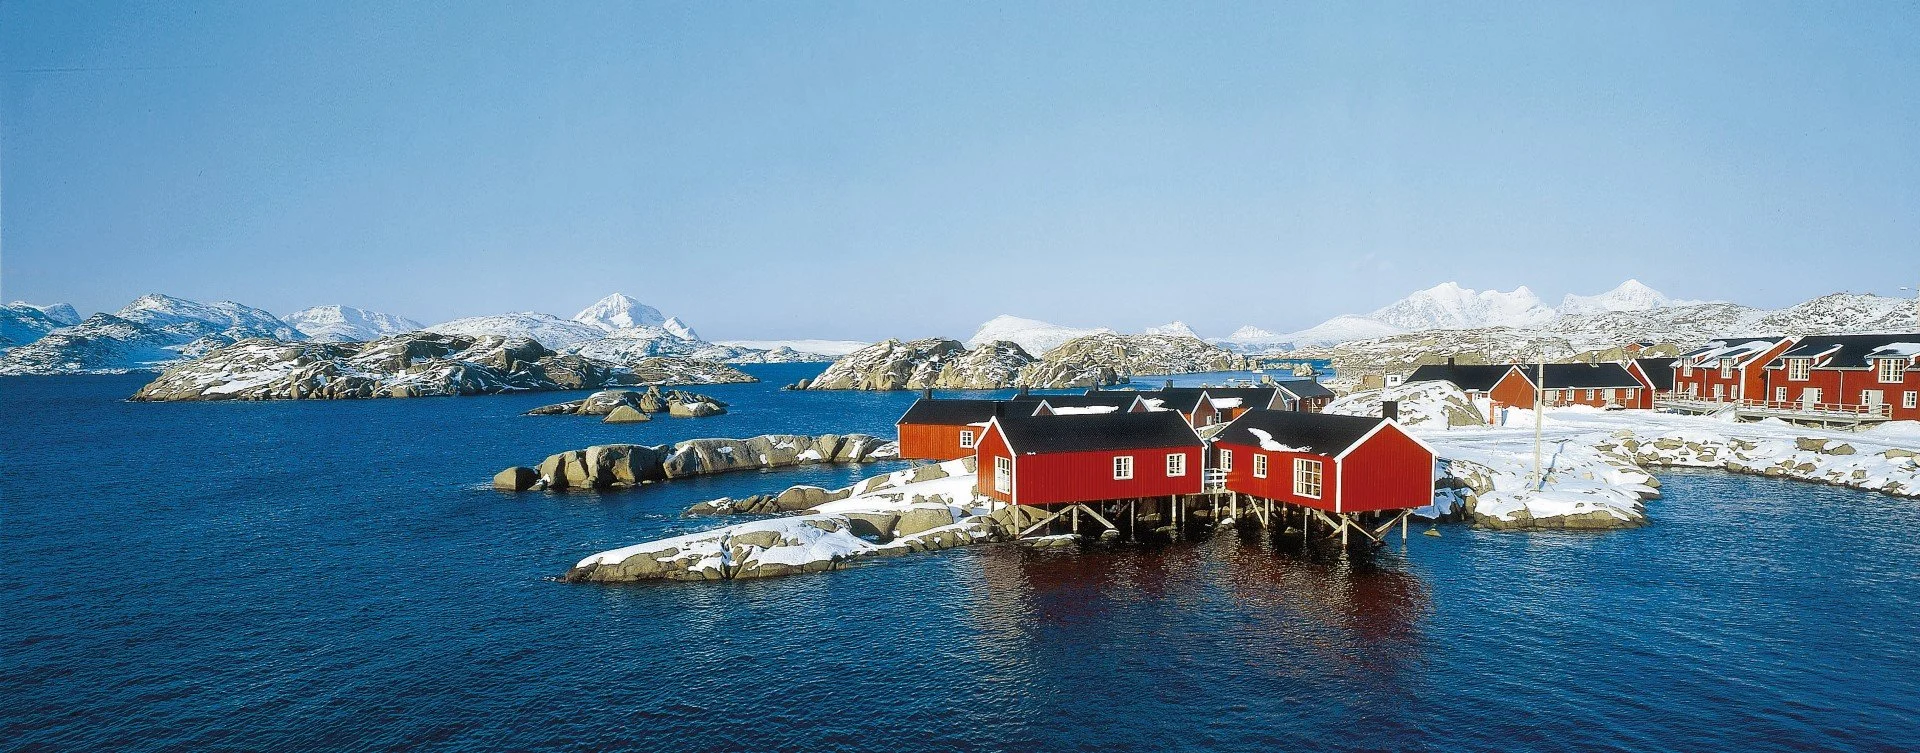 Traditional red fishing cottages, called "Rorbu", in the town of Svolvær, Norway